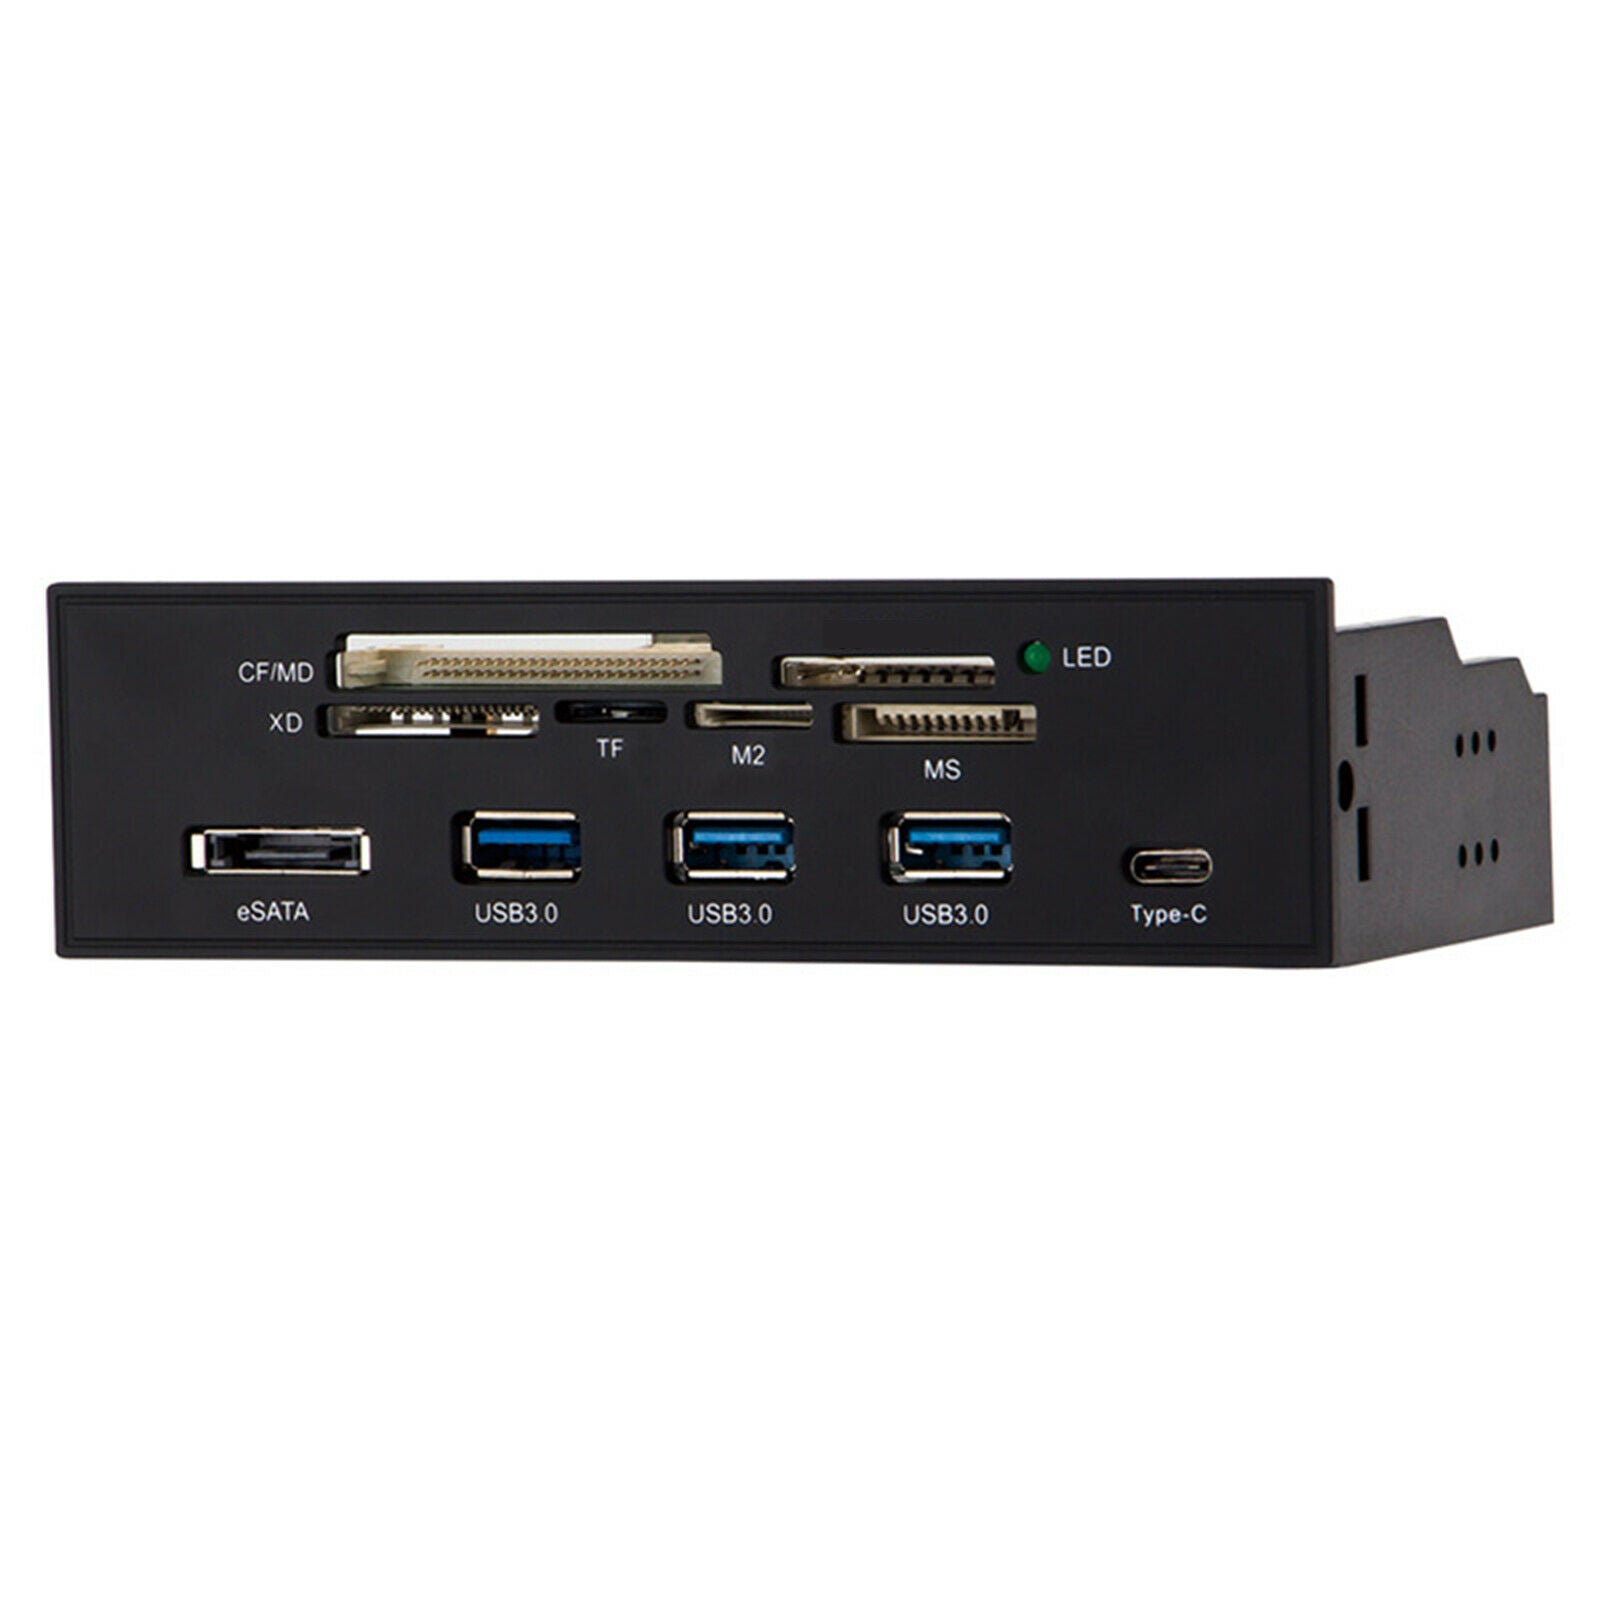 Internal Card Reader Dashboard PC Front Panel USB 3.0 with 3 USB 3.0 Ports